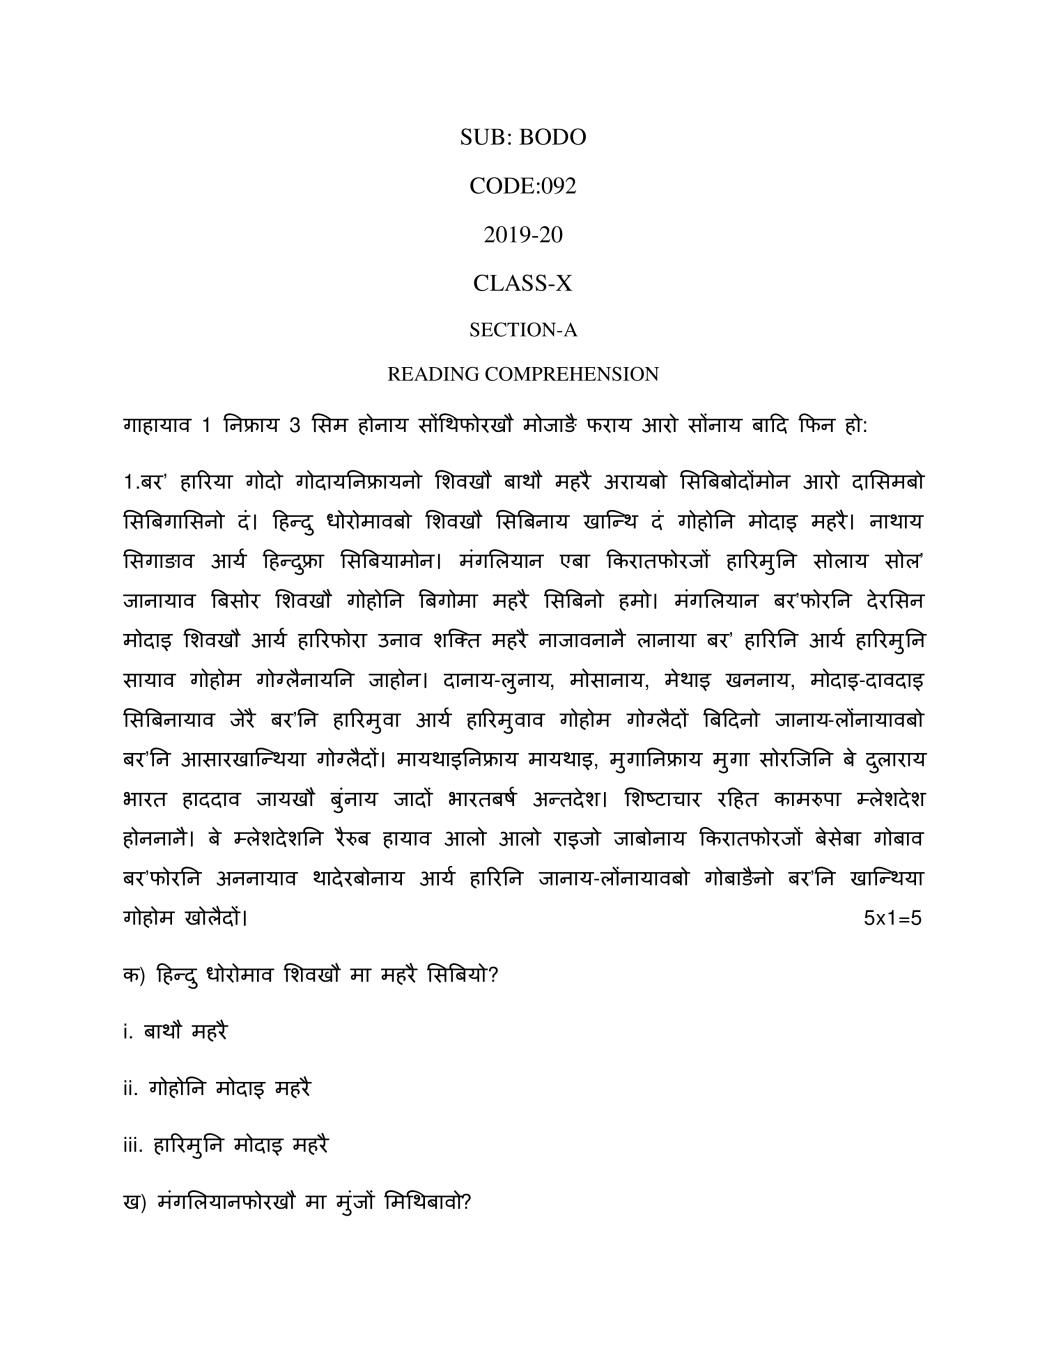 CBSE Class 10 Sample Paper 2020 for Bodo - Page 1